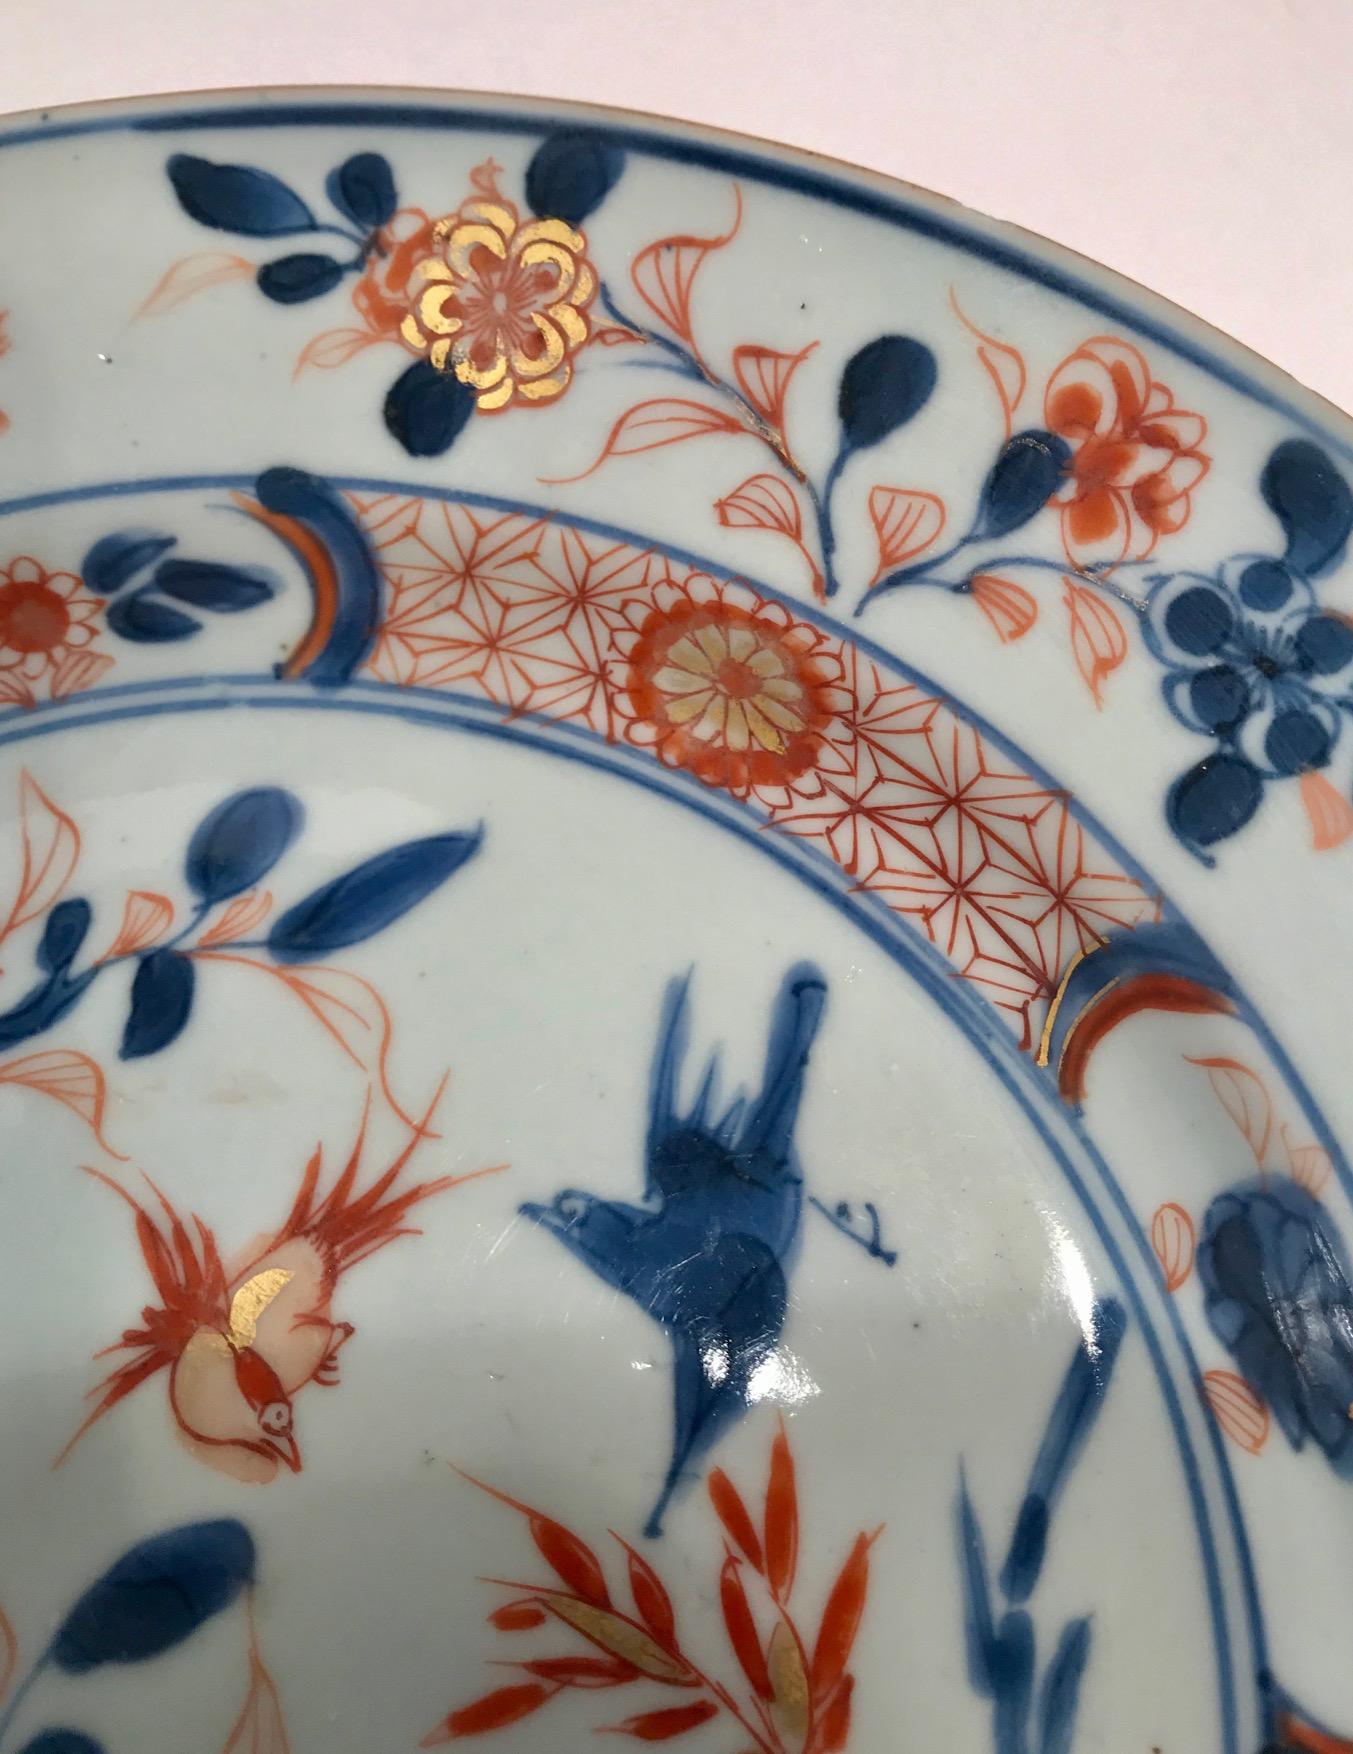 Beautiful eighteenth century deep Chinese export porcelain plate known as Chinese Imari. This piece is elegantly decorated first in an underglaze blue and then overpainted in iron red and gold that has not been rubbed off. Flowers and birds abound